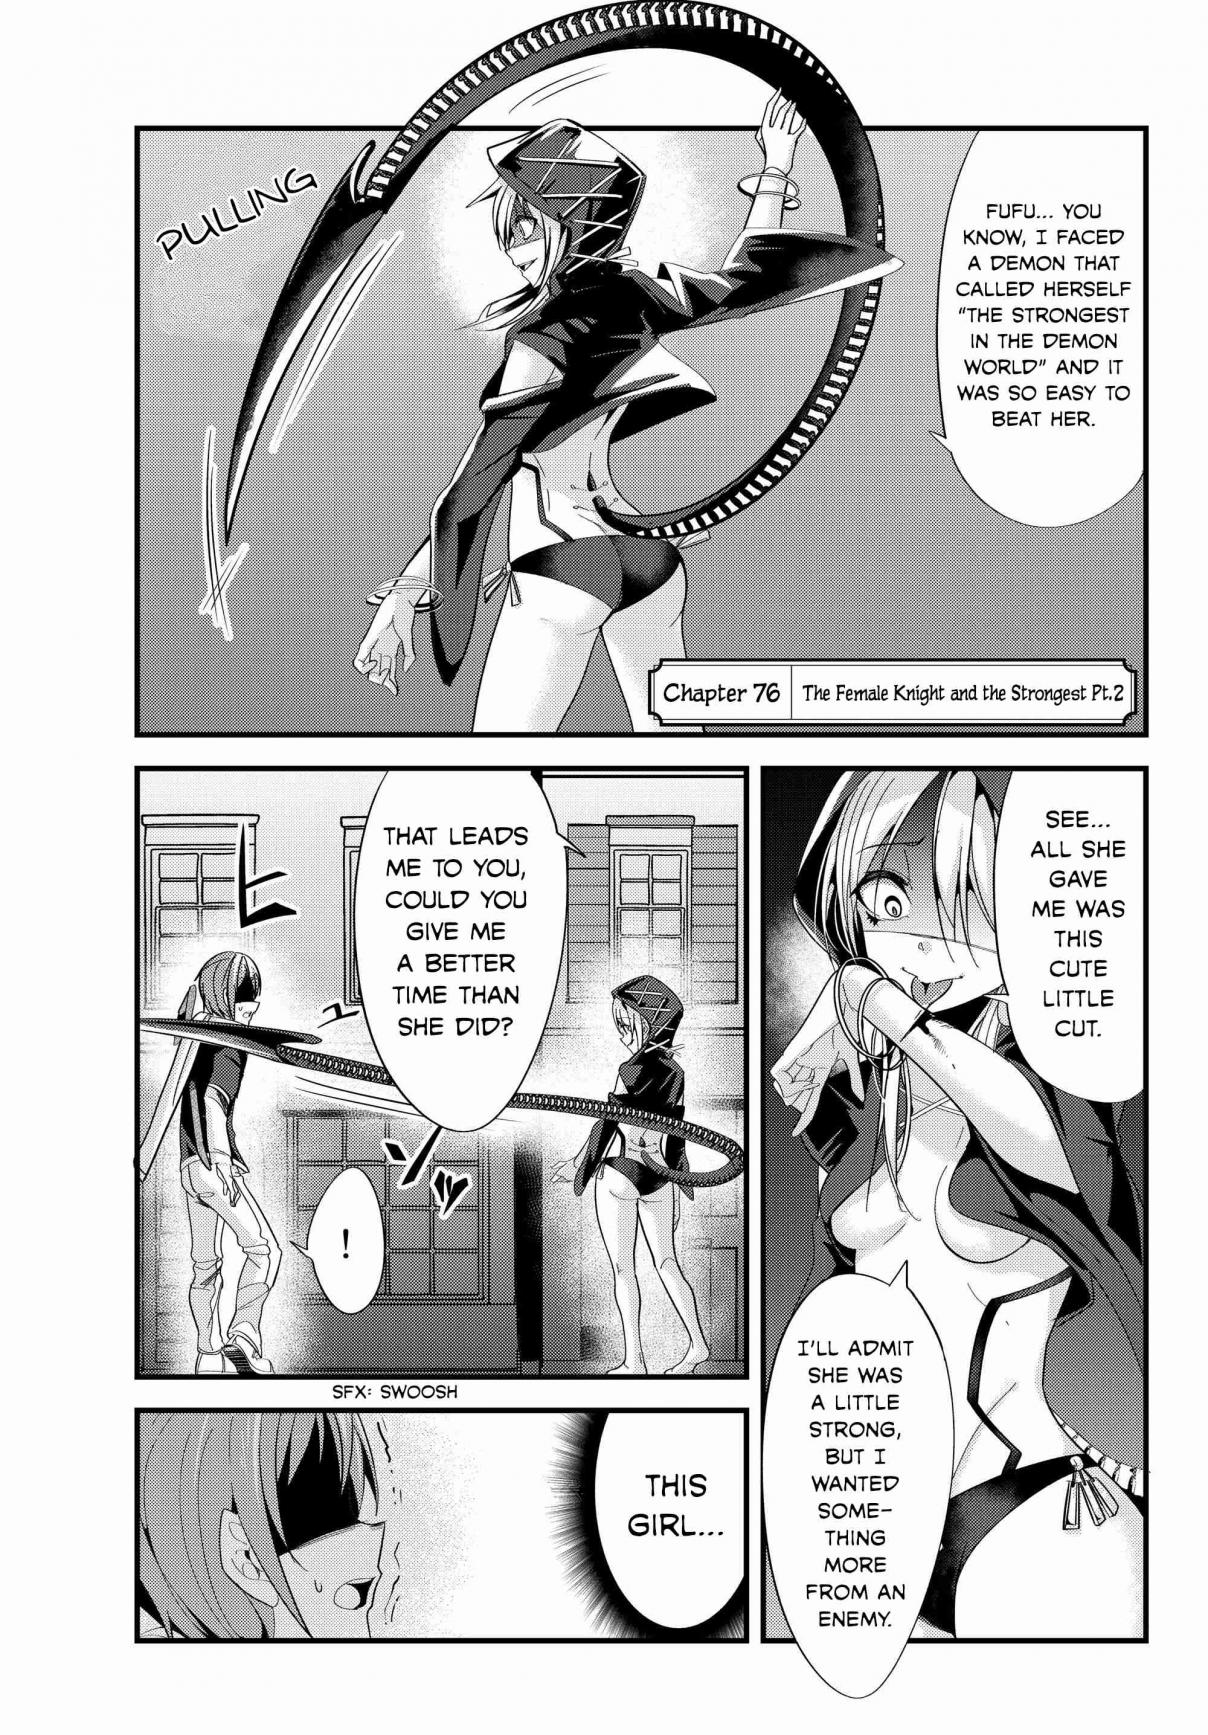 A Story About Treating a Female Knight, Who Has Never Been Treated as a Woman, as a Woman Ch. 76 The Female Knight and the Strongest Pt.2